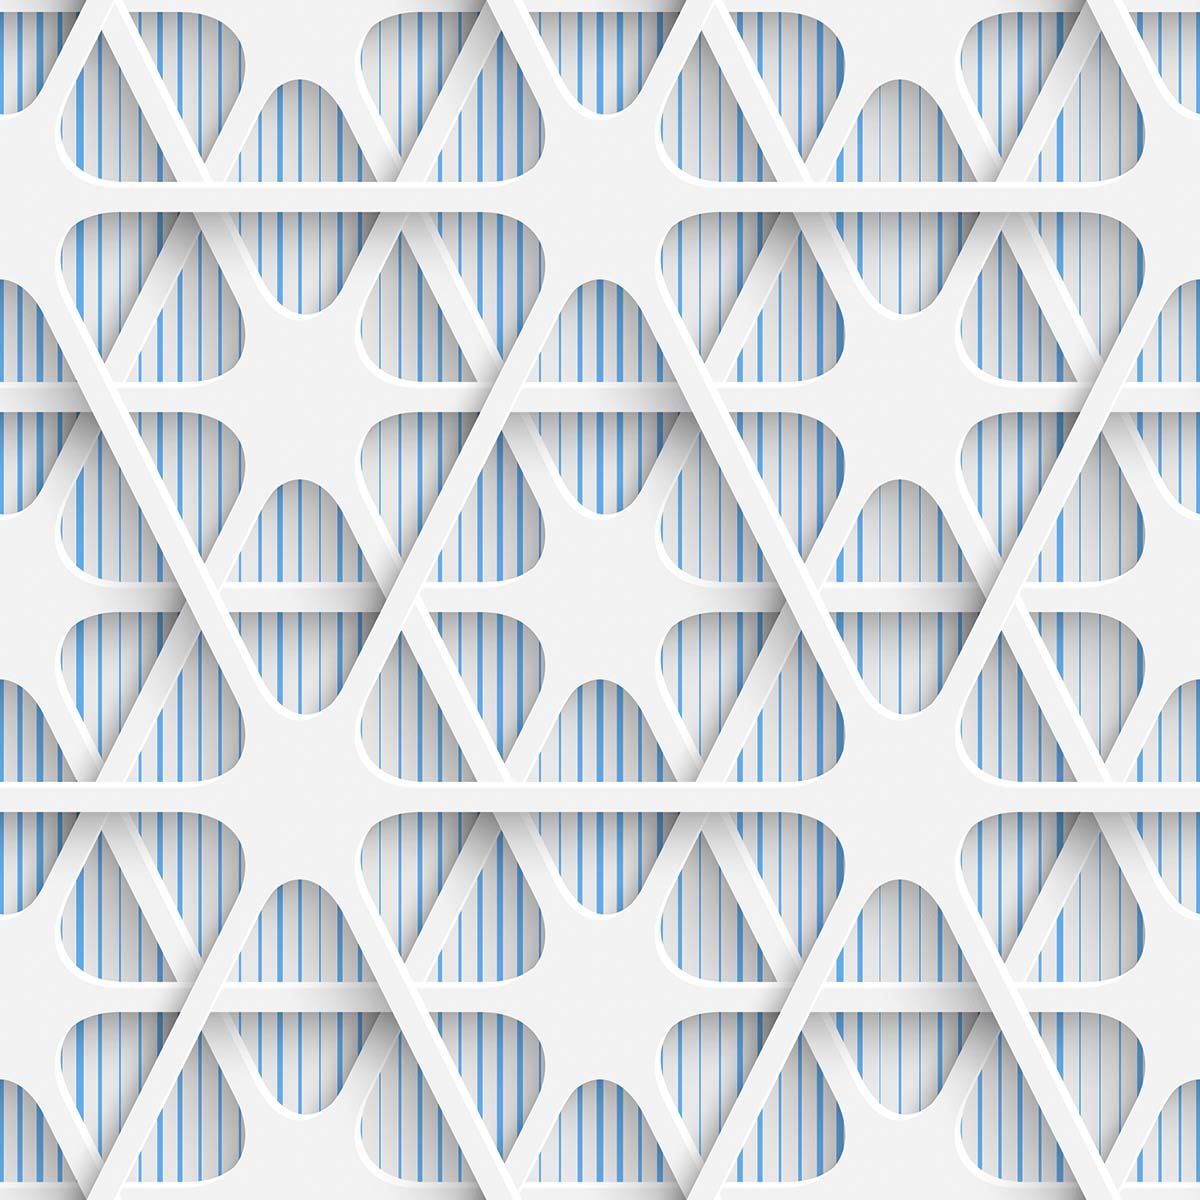 A white pattern with blue and white stripes